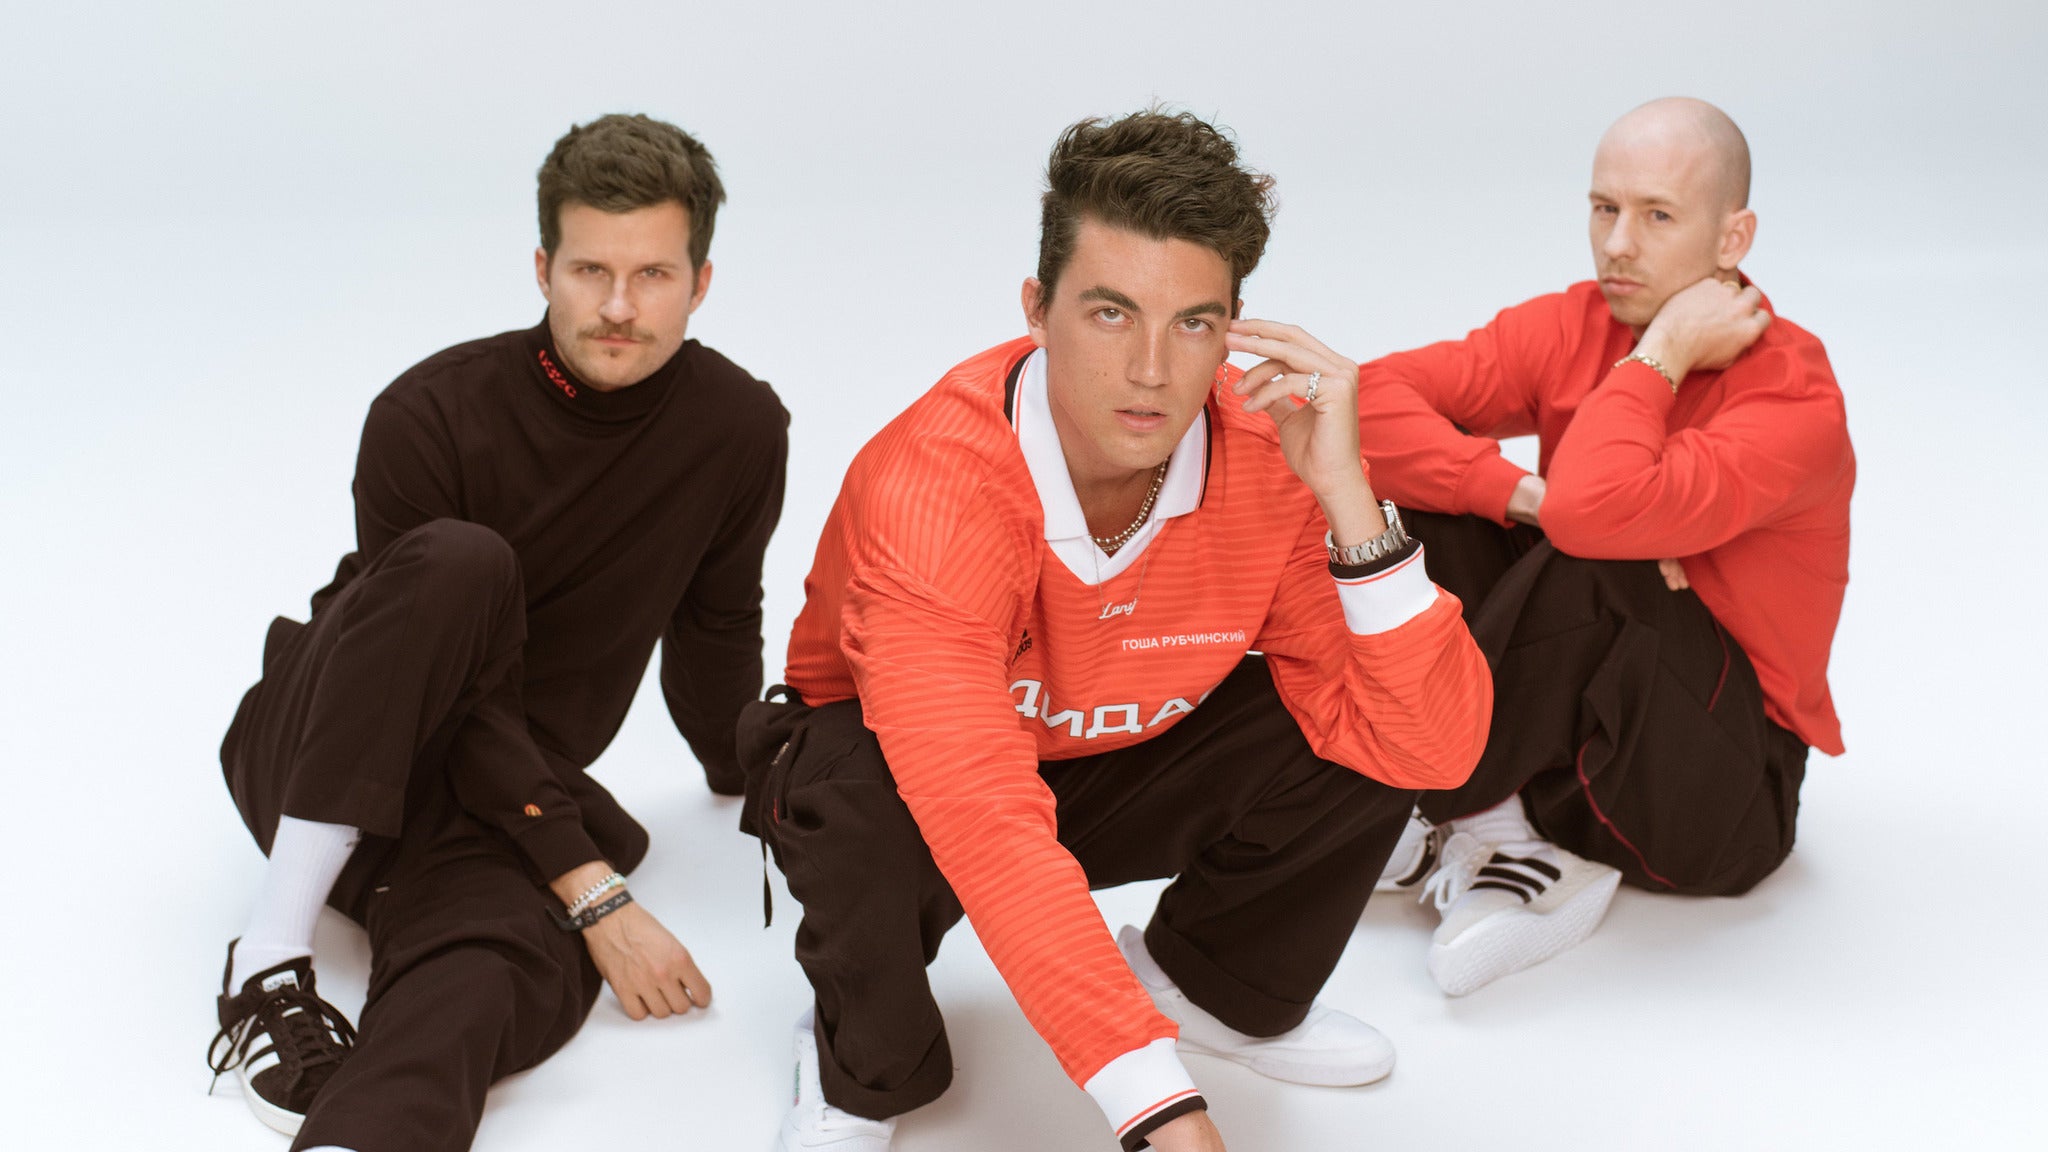 LANY in Pittsburgh promo photo for Artist presale offer code